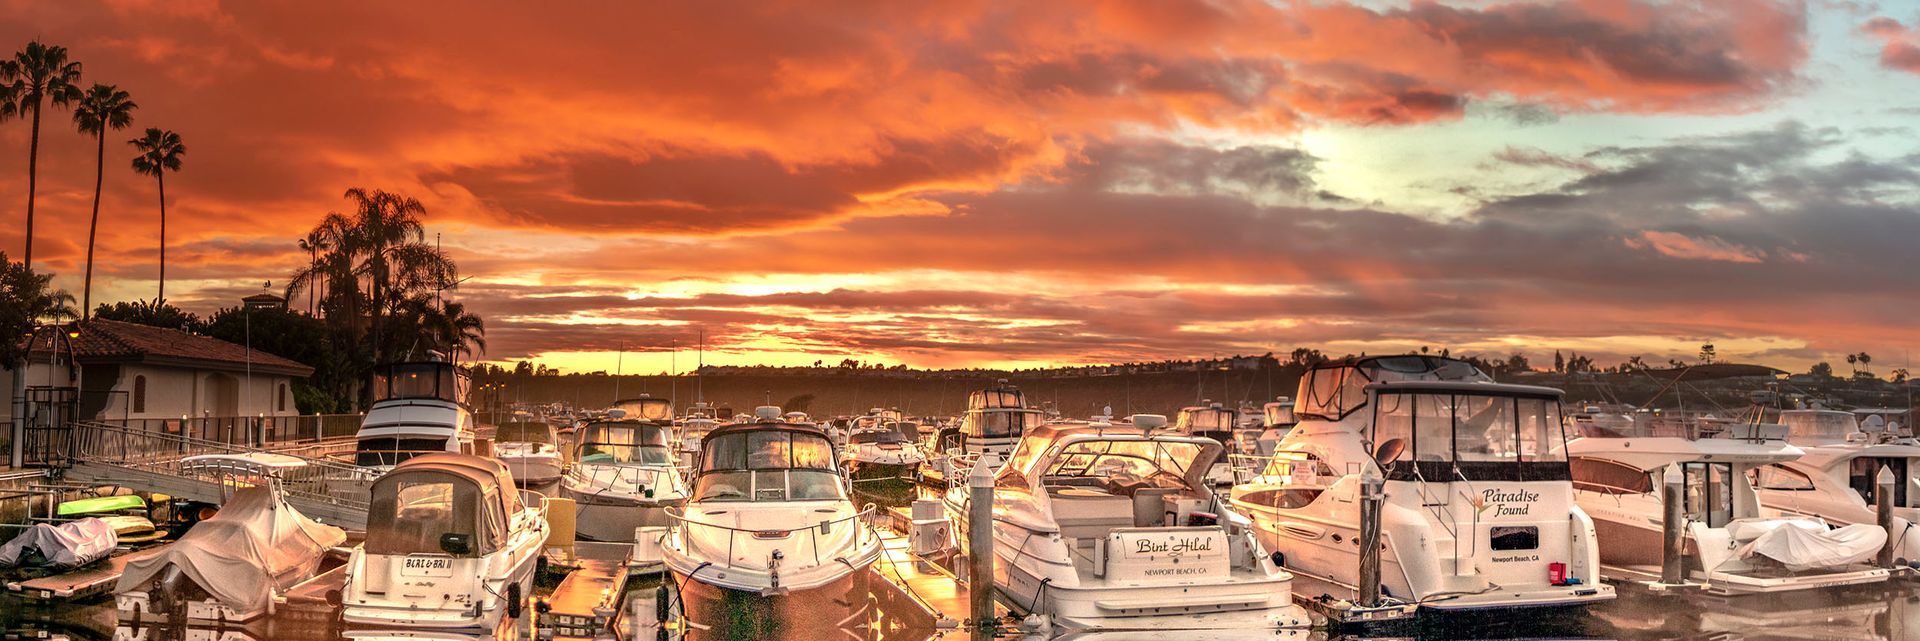 Newport Dunes Marina dock with a golden sunset in the background.